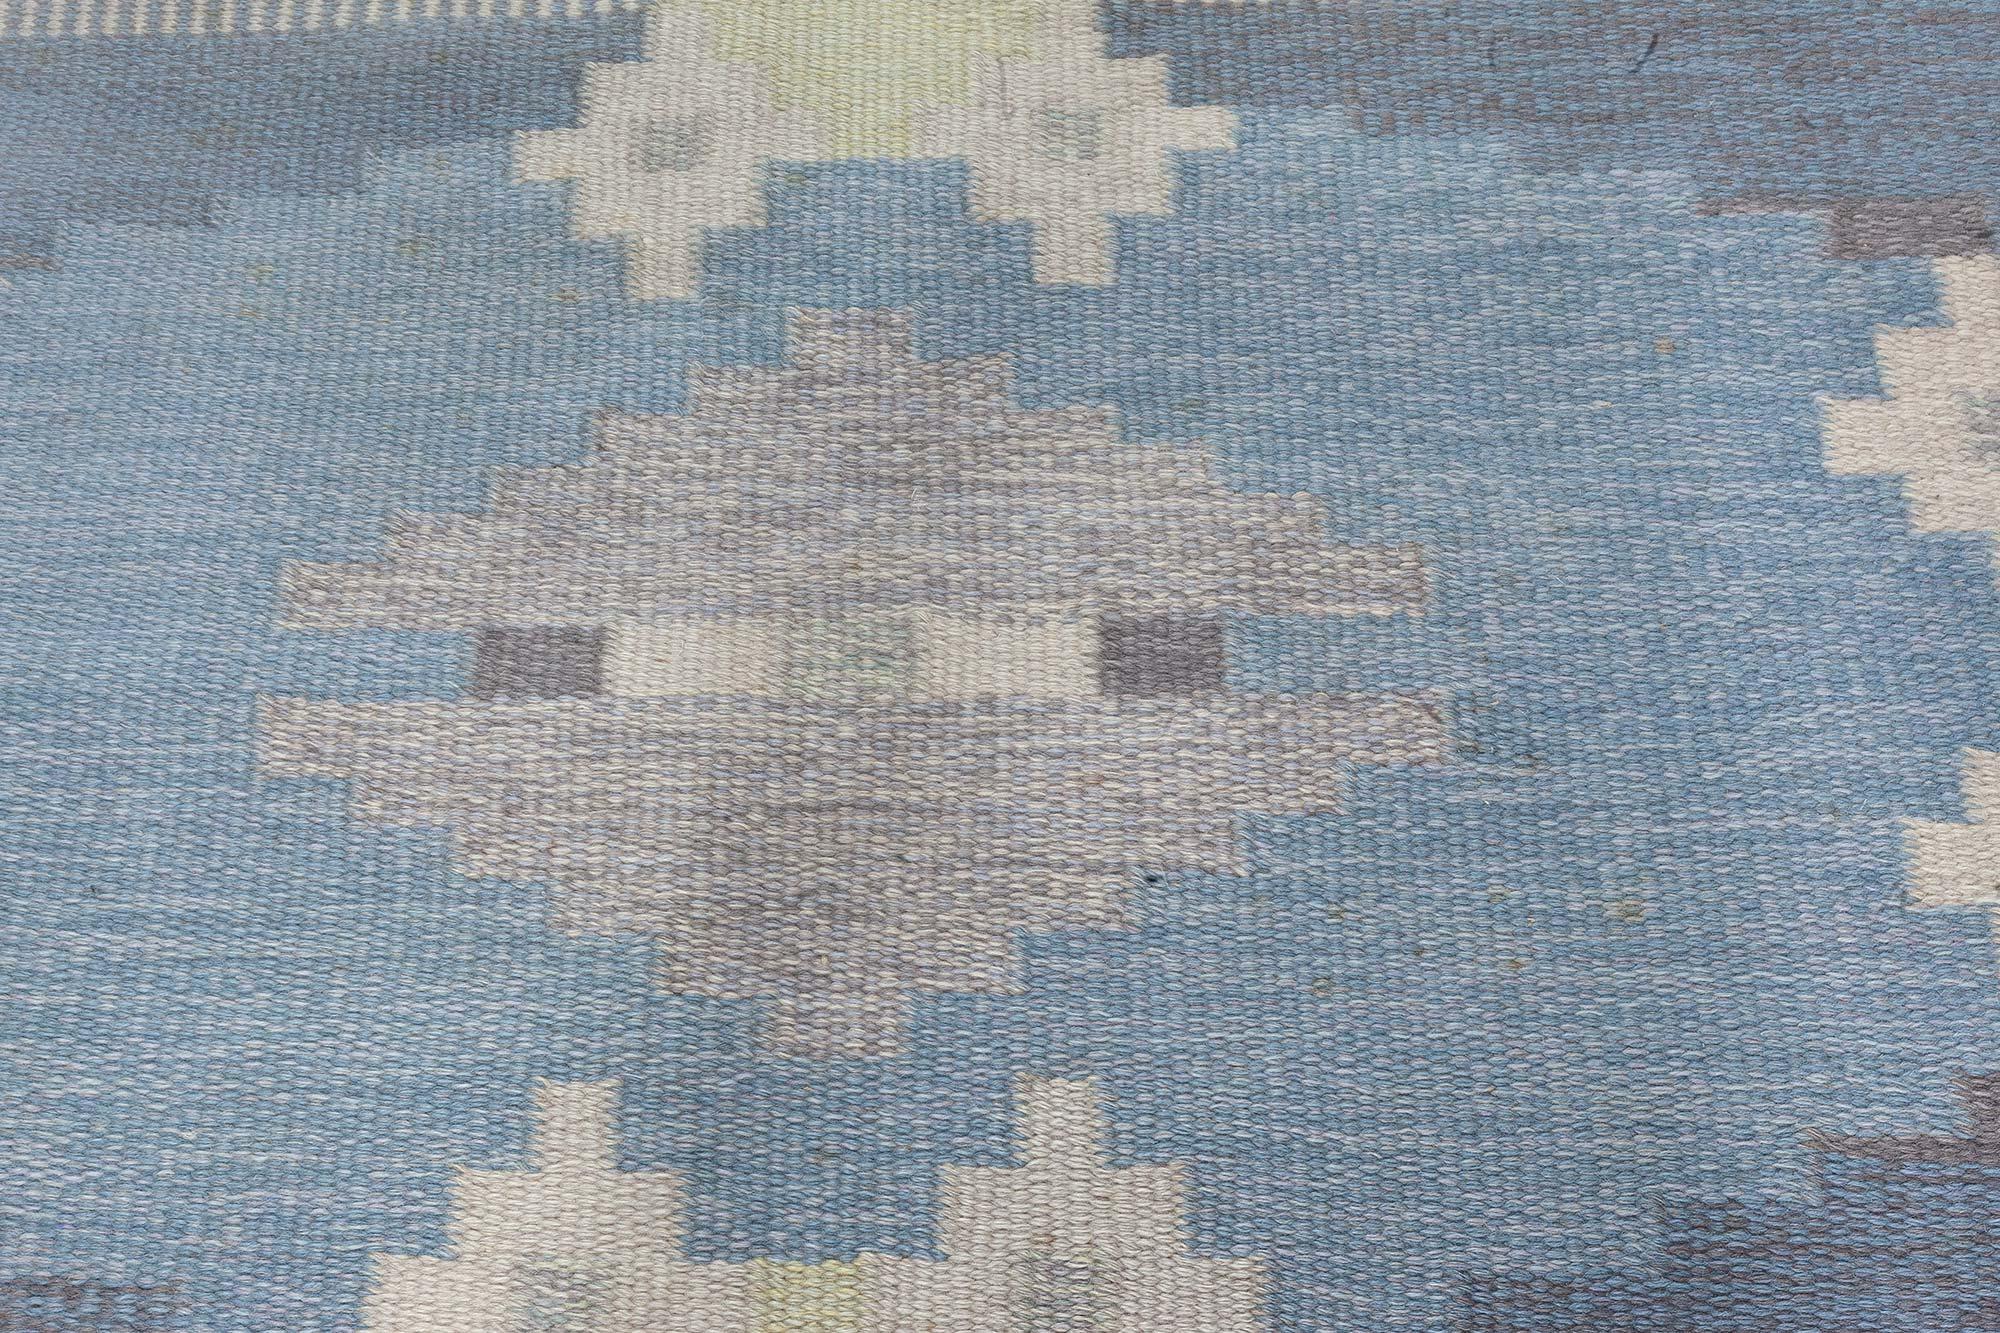 Hand-Woven Vintage Flat Woven Rug by Ingegerd Silow For Sale